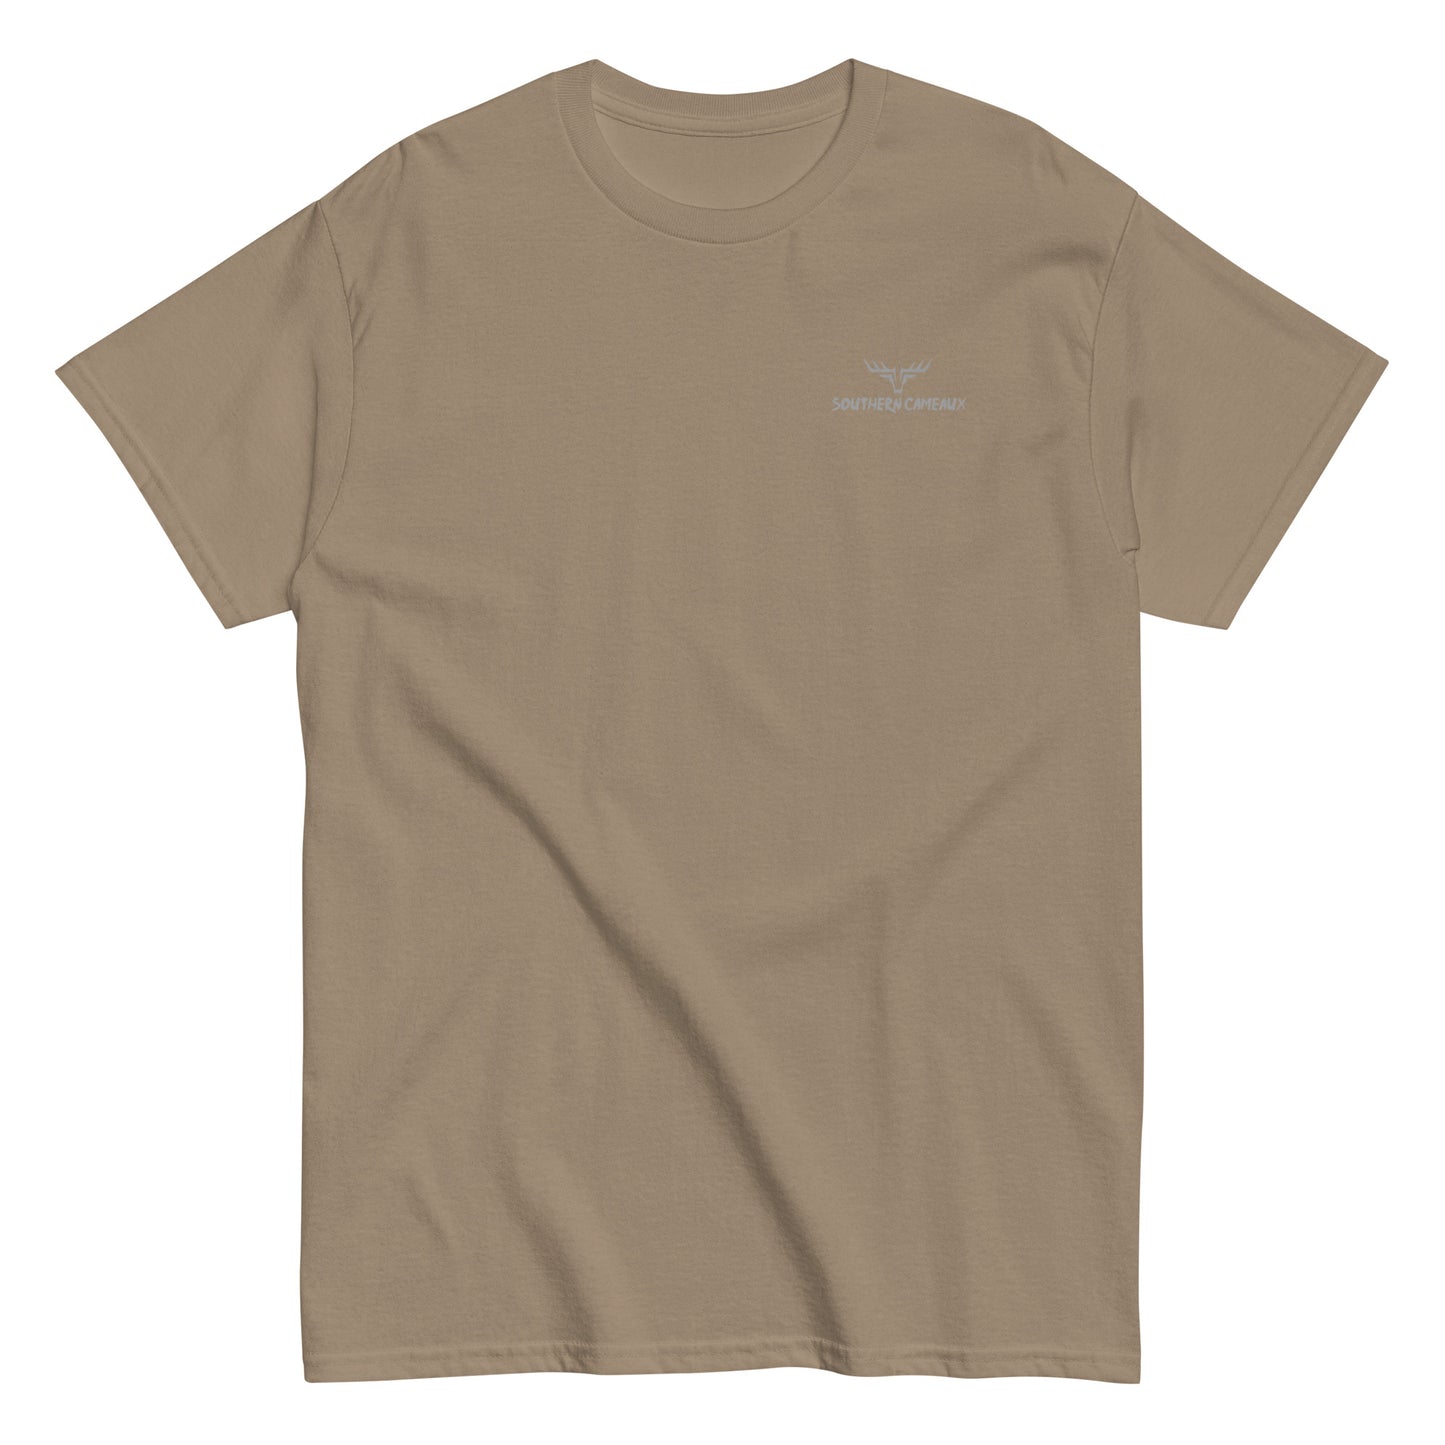 SC Merely hunting, Men's classic T